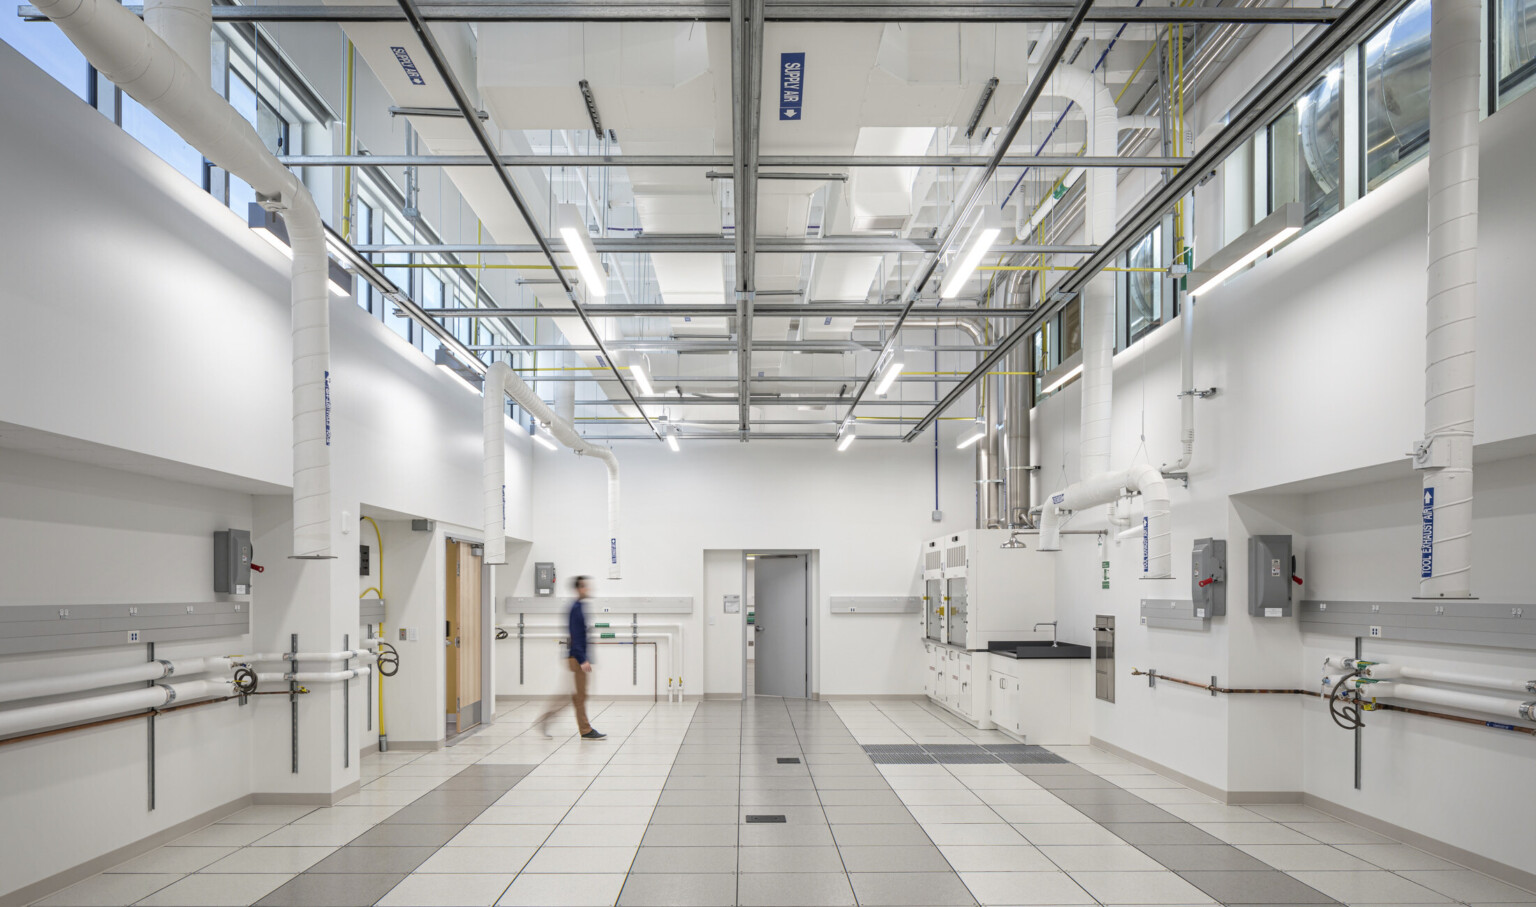 Crisp white clean lab space in National Institute of Standards and Technology overhead lighting and suport systems